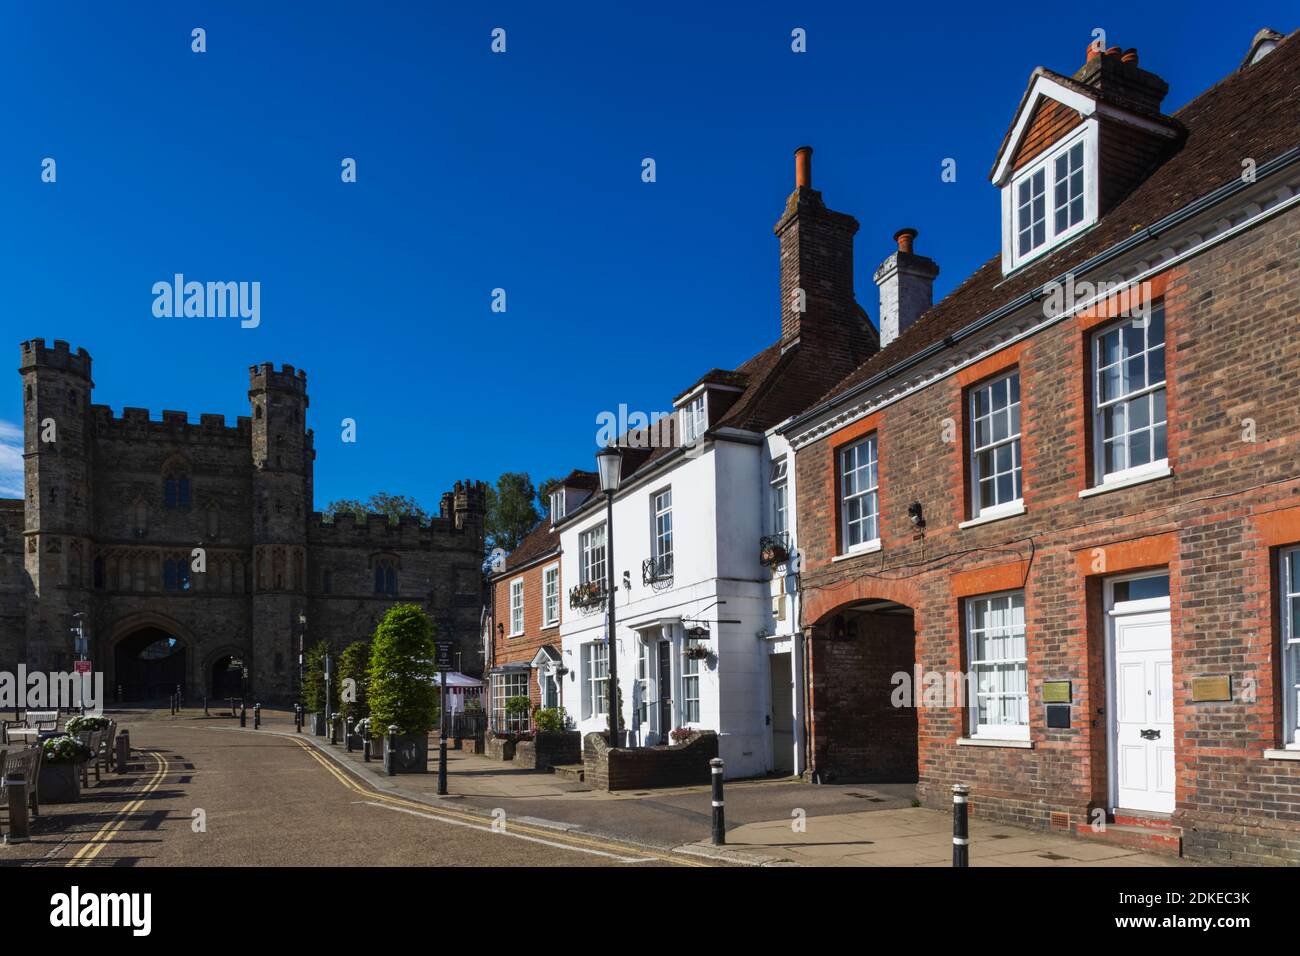 England, East Sussex, Battle, High Street Shops and Battle Abbey Gatehouse Stock Photo